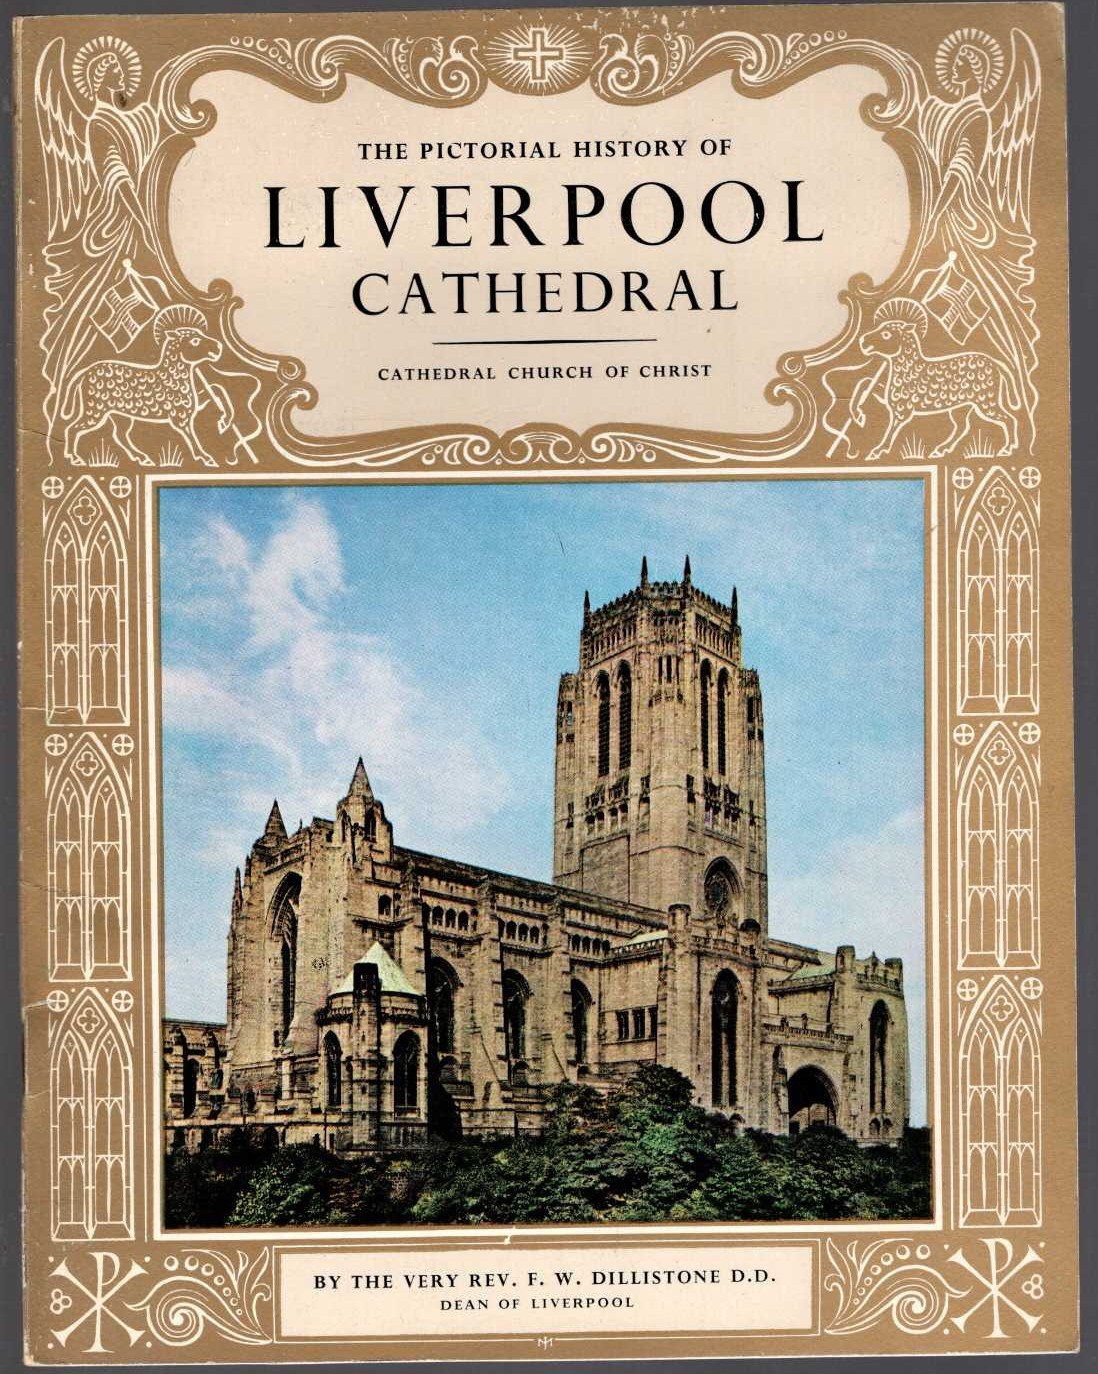 \ THE PICTORIAL HISTORY OF LIVERPOOL CATHEDRAL by F.W.Dillestone front book cover image